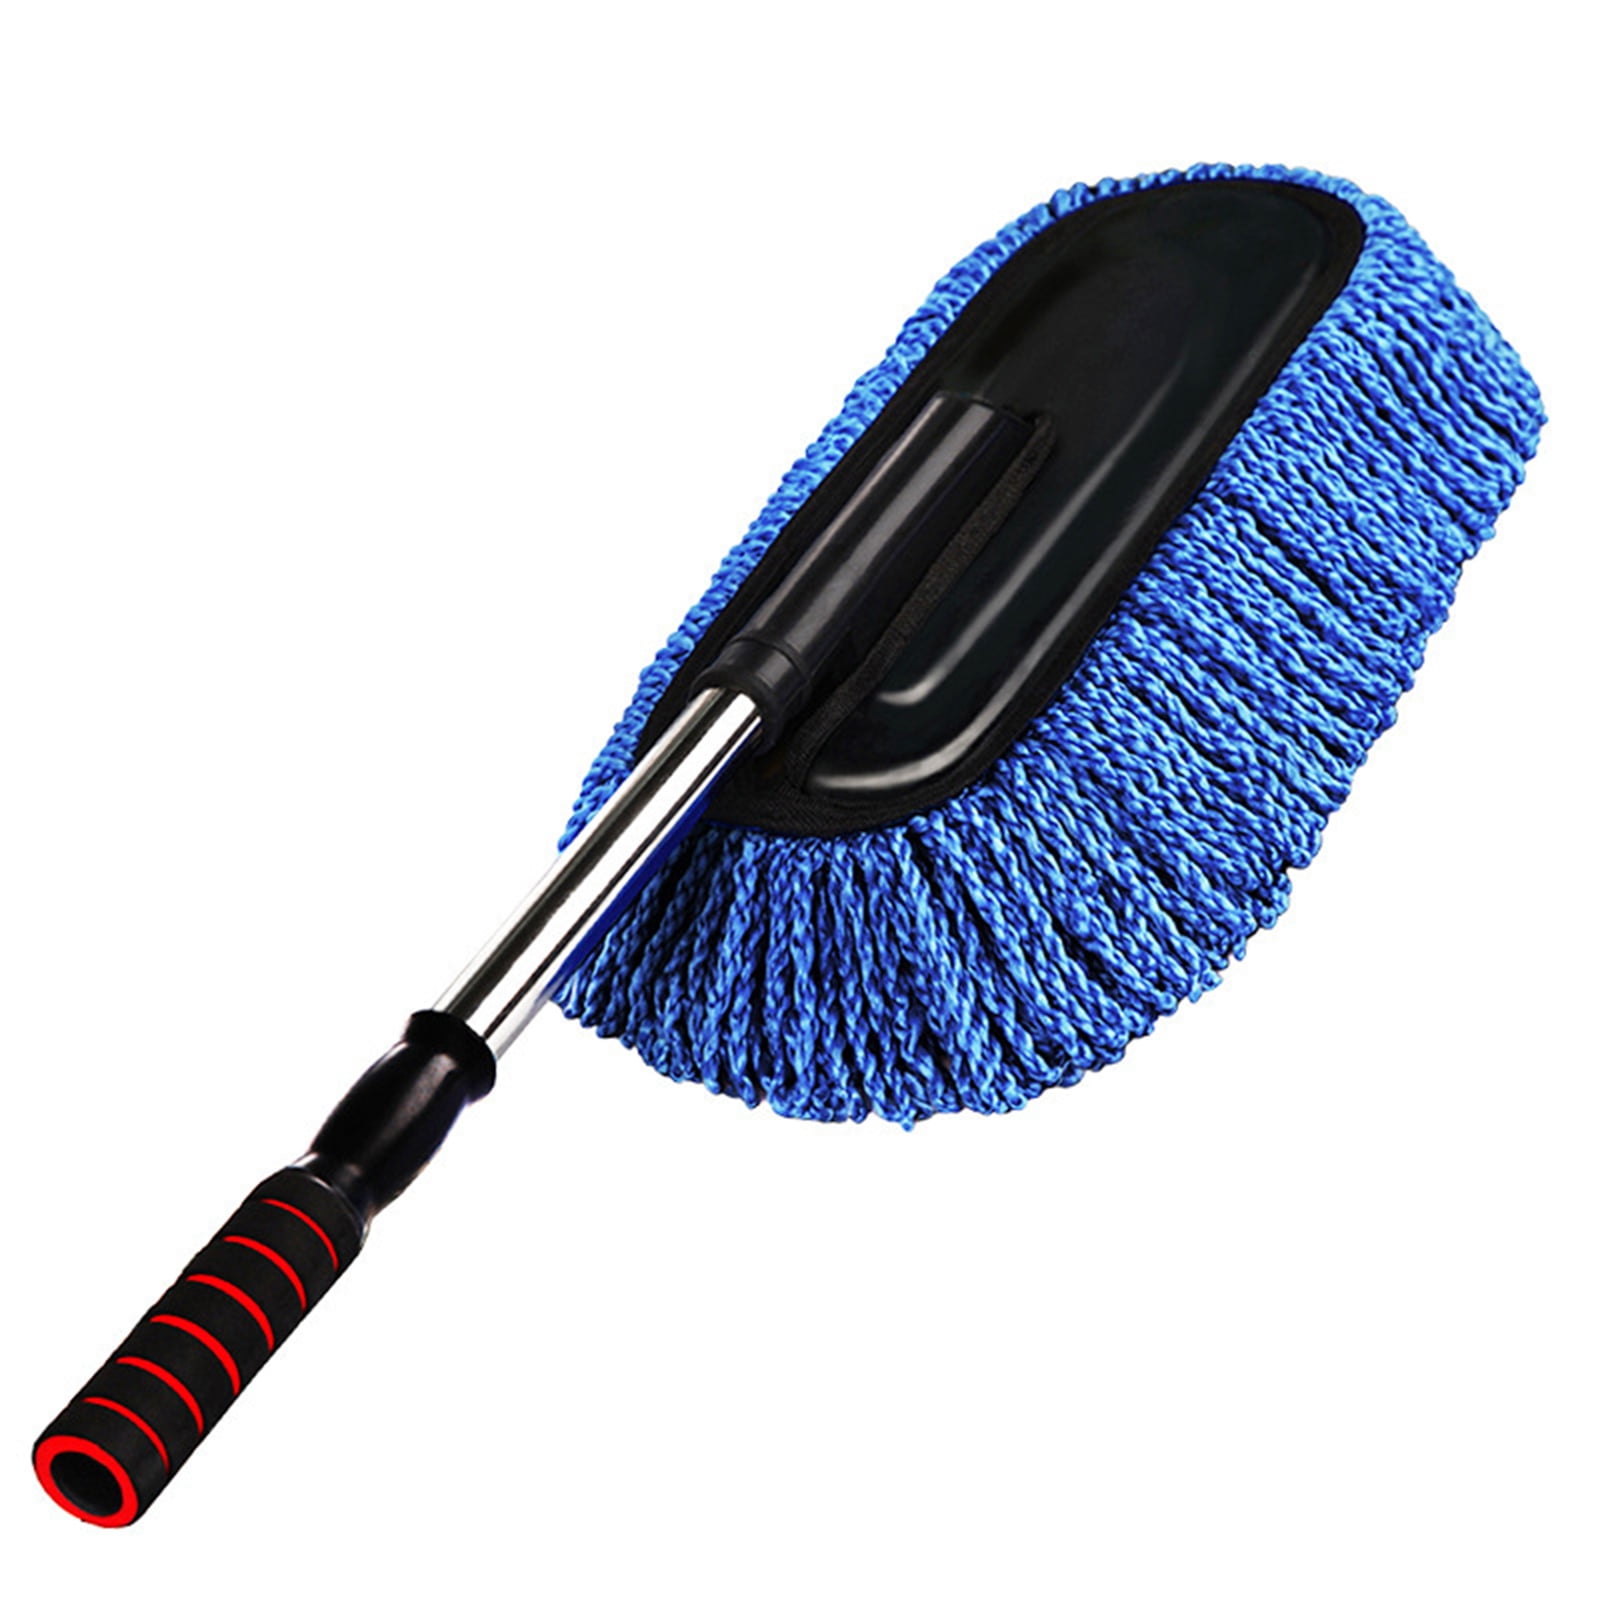 California Car Duster with Plastic Handle and Wax Treated Cotton Mop  Removes Auto Dust Scratch Free (Colors May Vary)